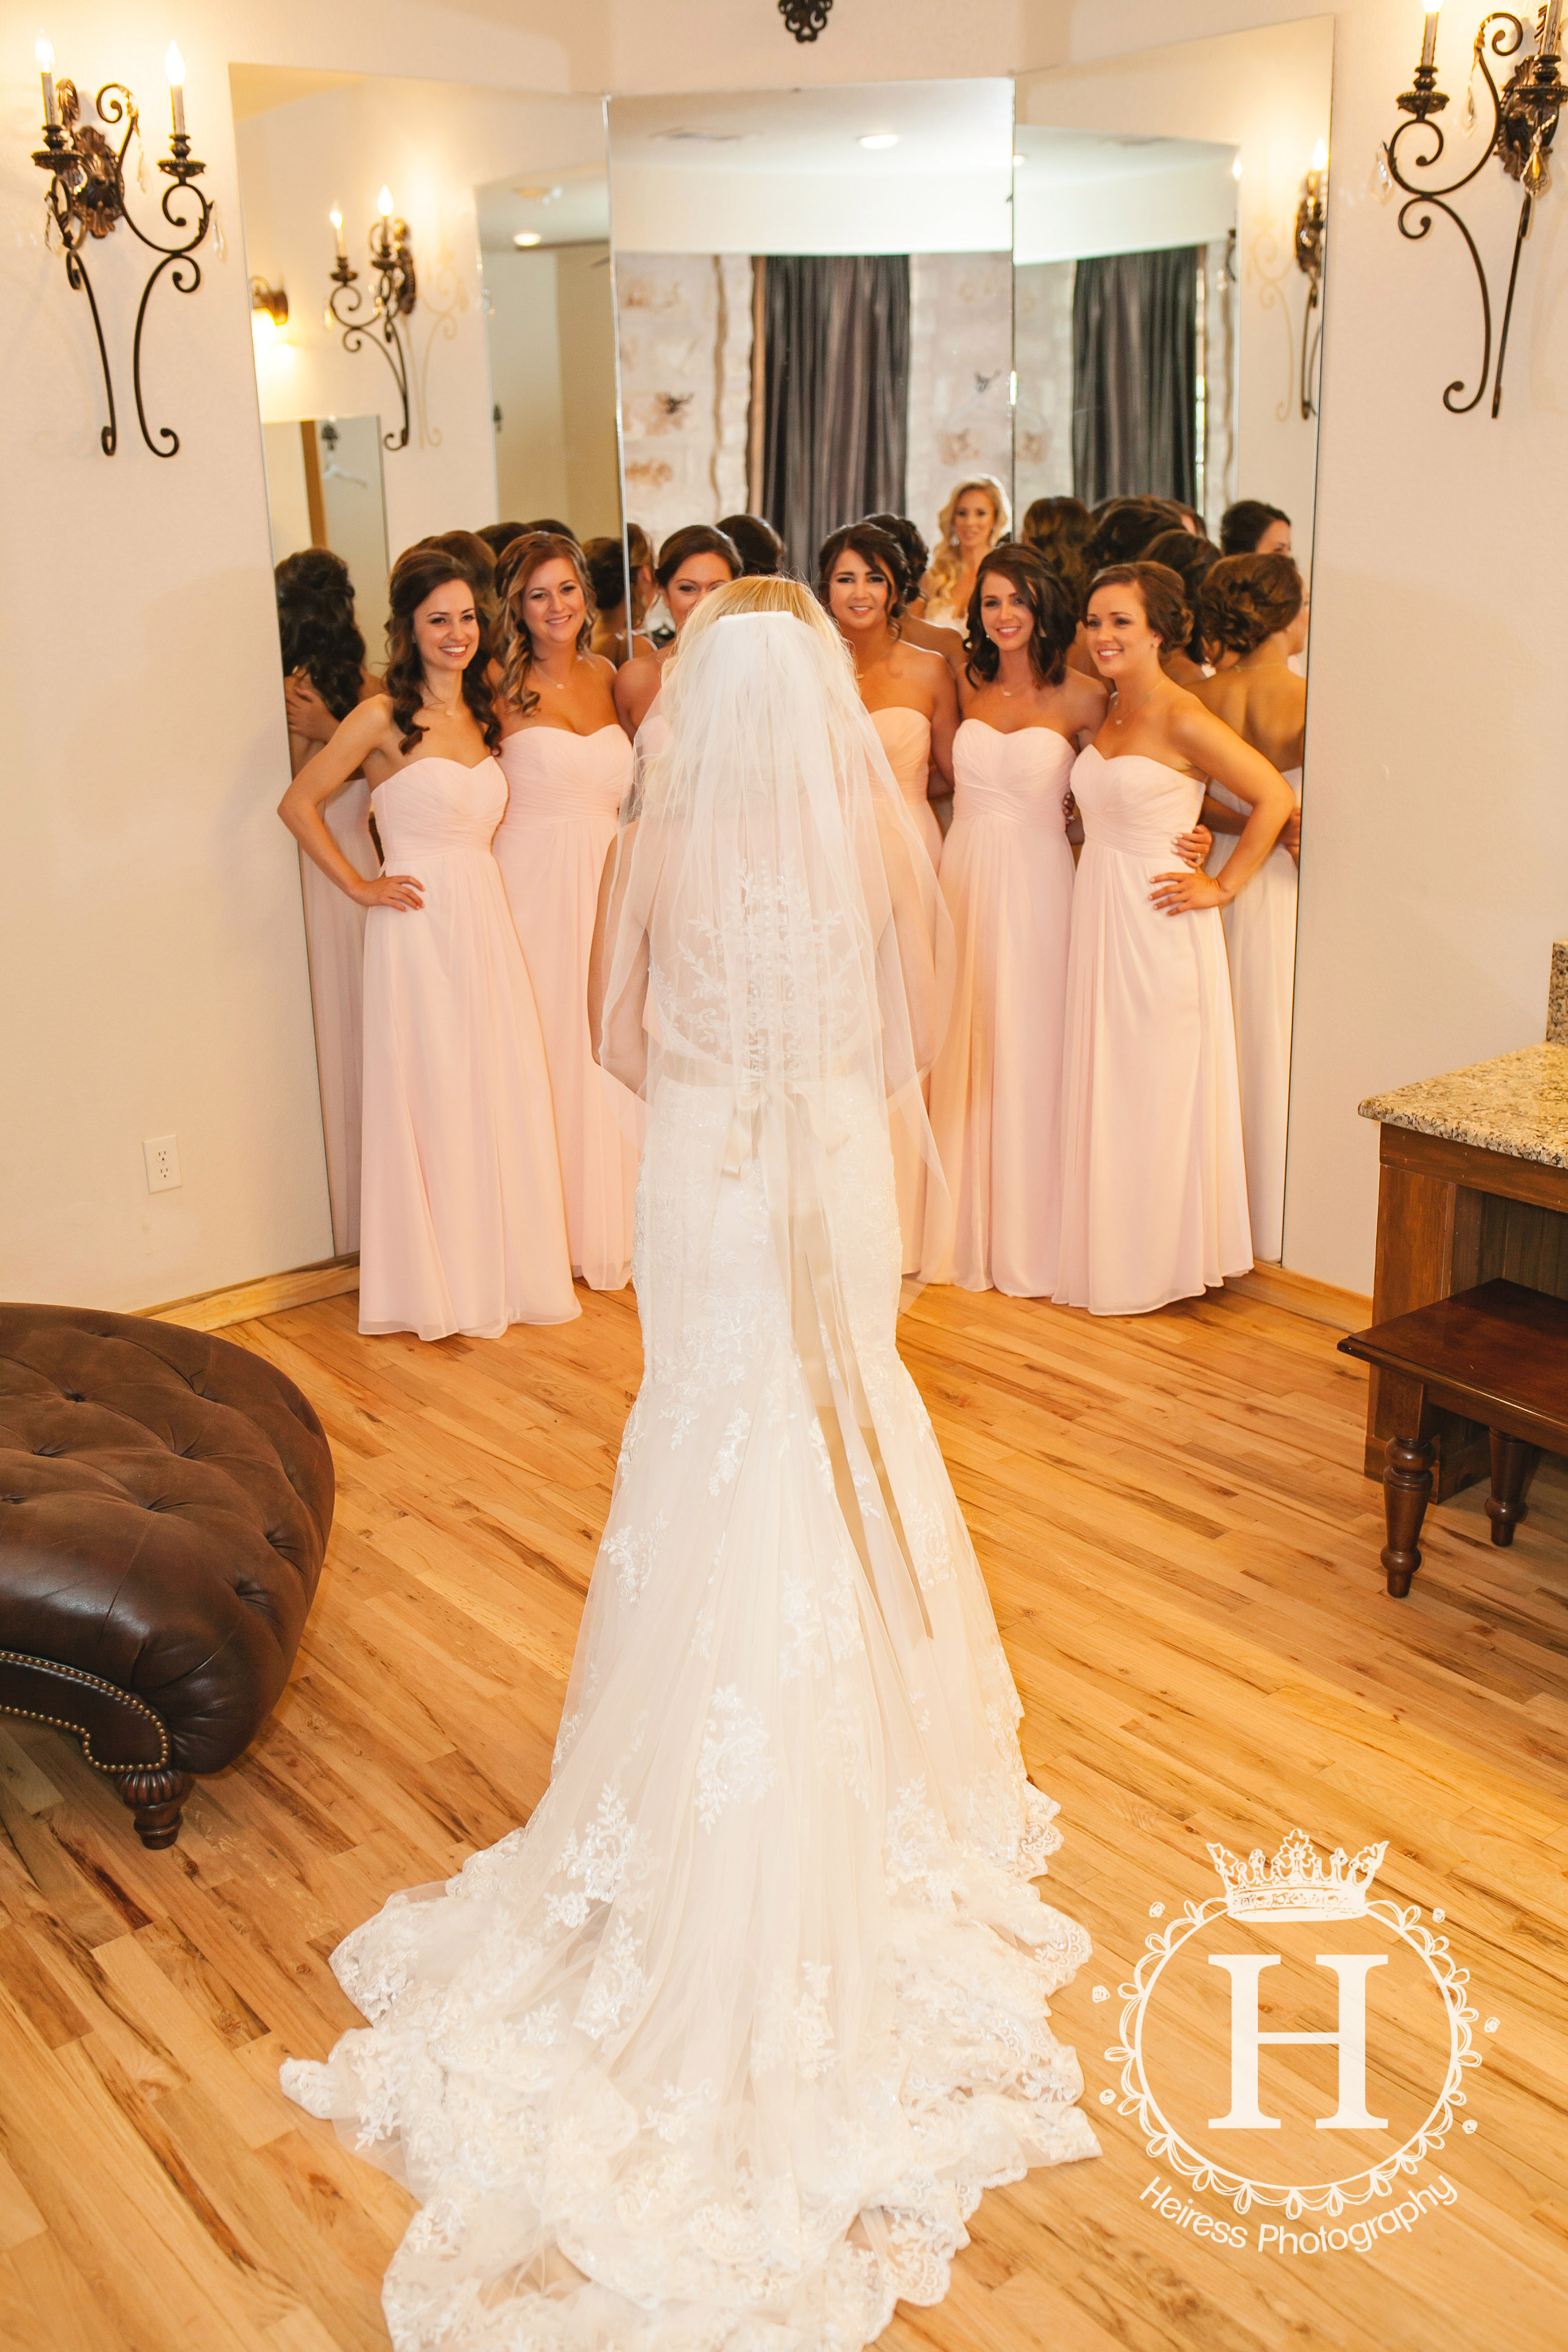 Wedding Photographers in Fort Worth TX